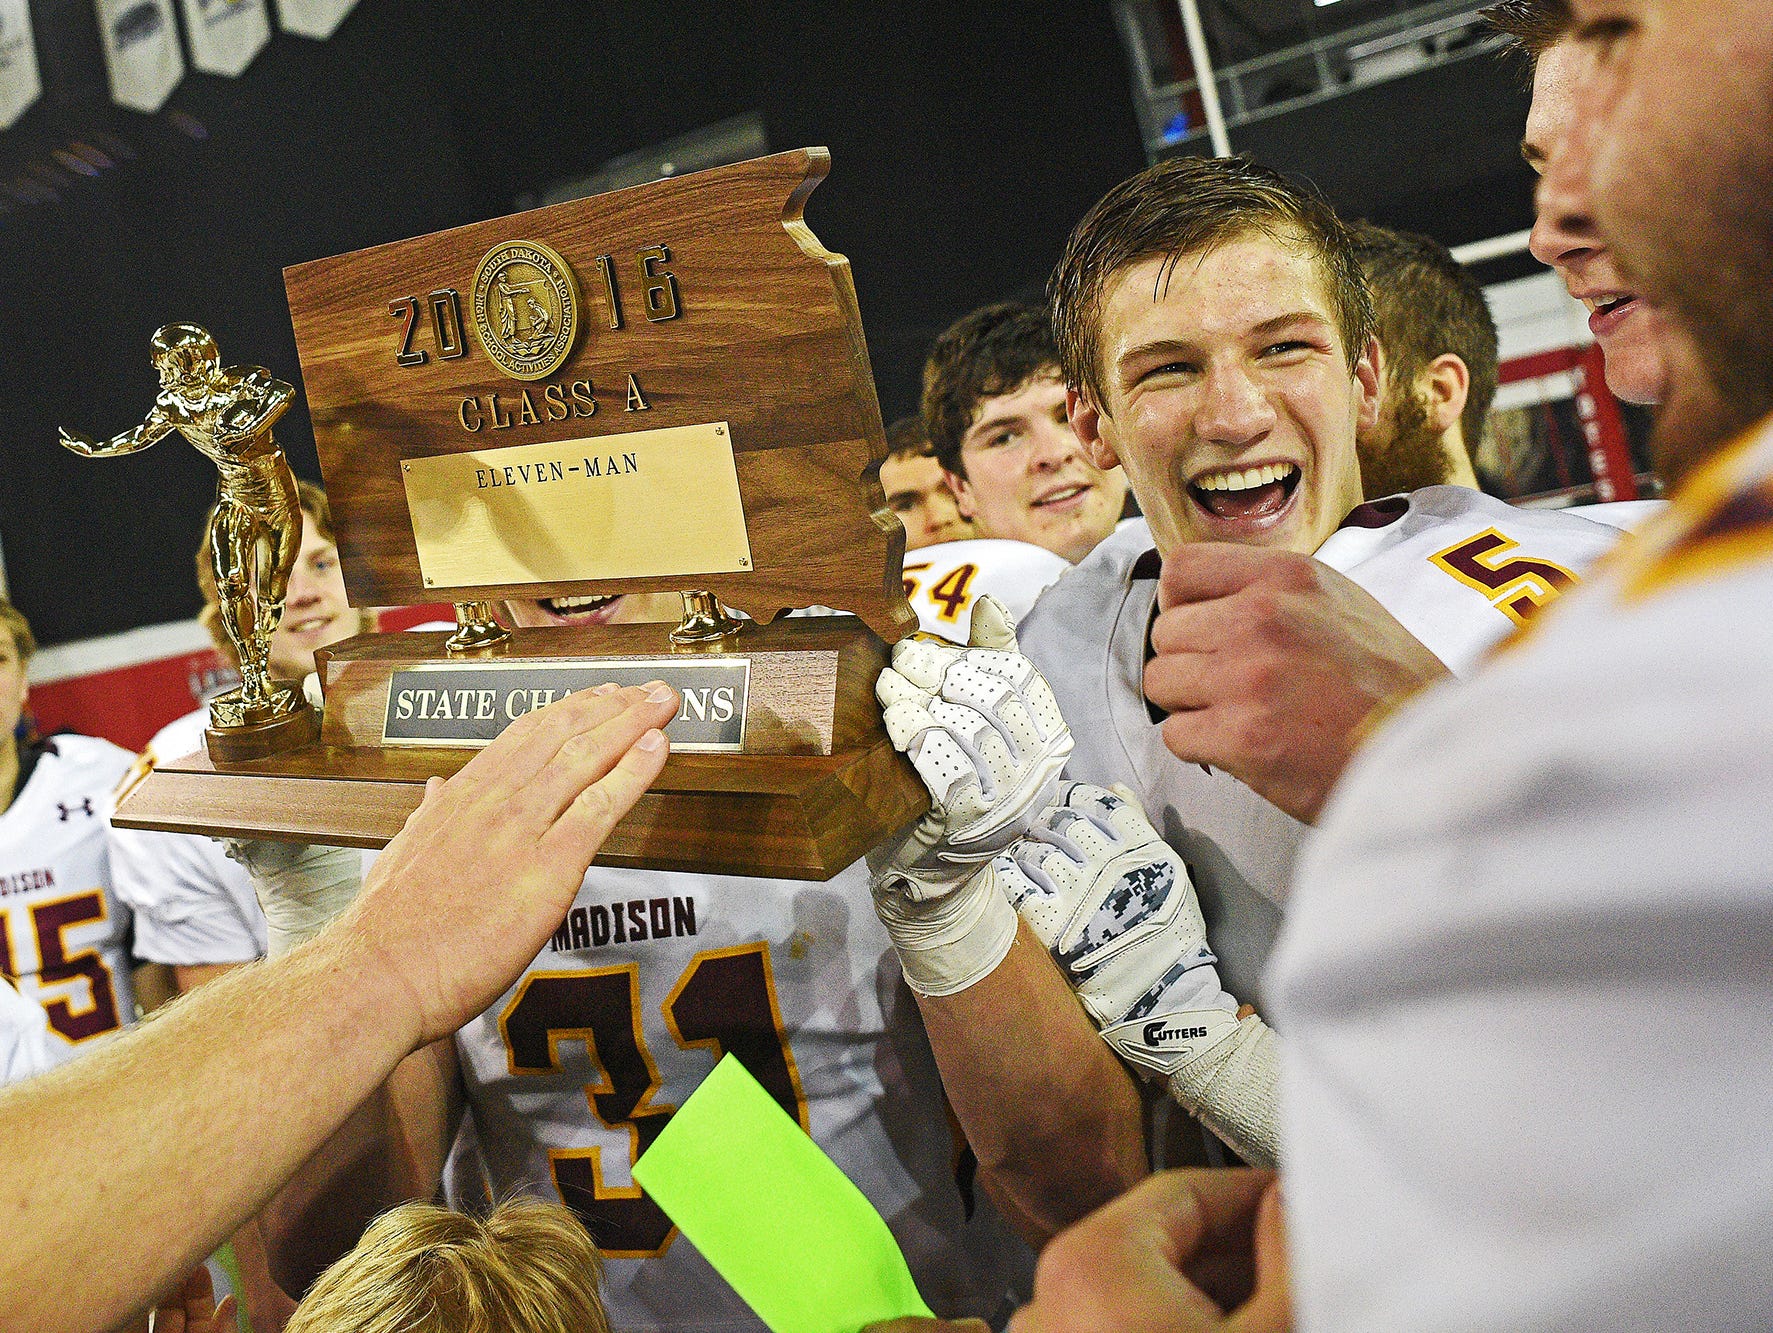 Madison's Noah Guse (5) celebrates with their trophy while celebrating their 39-0 win over Tea Area with their fans and families after the 2016 South Dakota State Class 11A Football Championship game Saturday, Nov. 12, 2016, at the DakotaDome on the University of South Dakota campus in Vermillion, S.D.